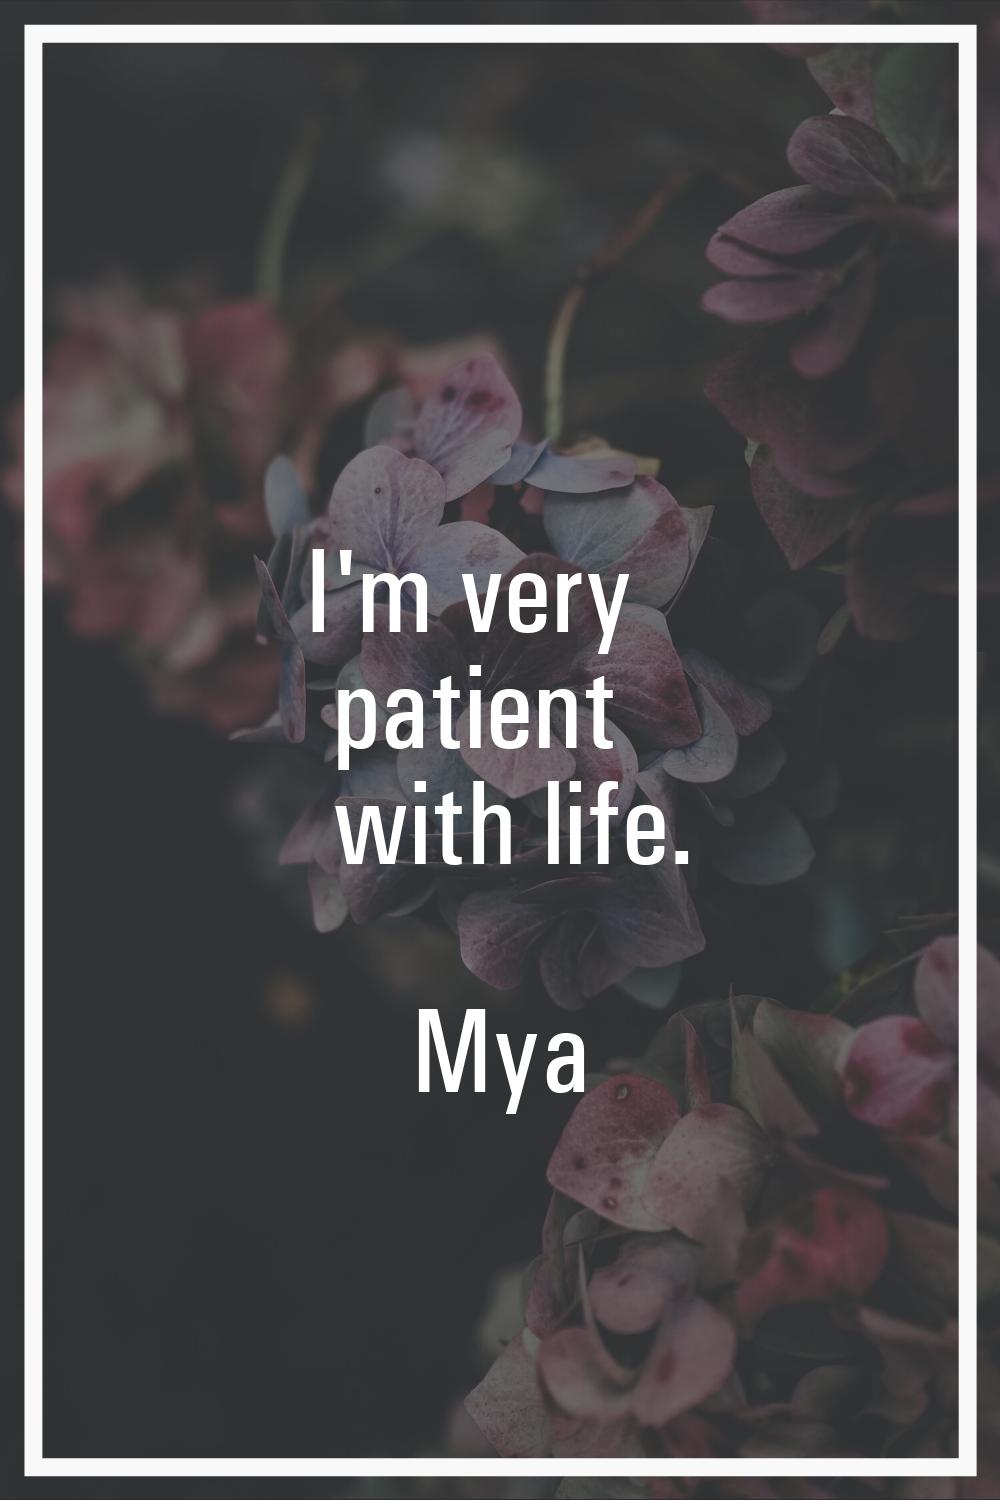 I'm very patient with life.